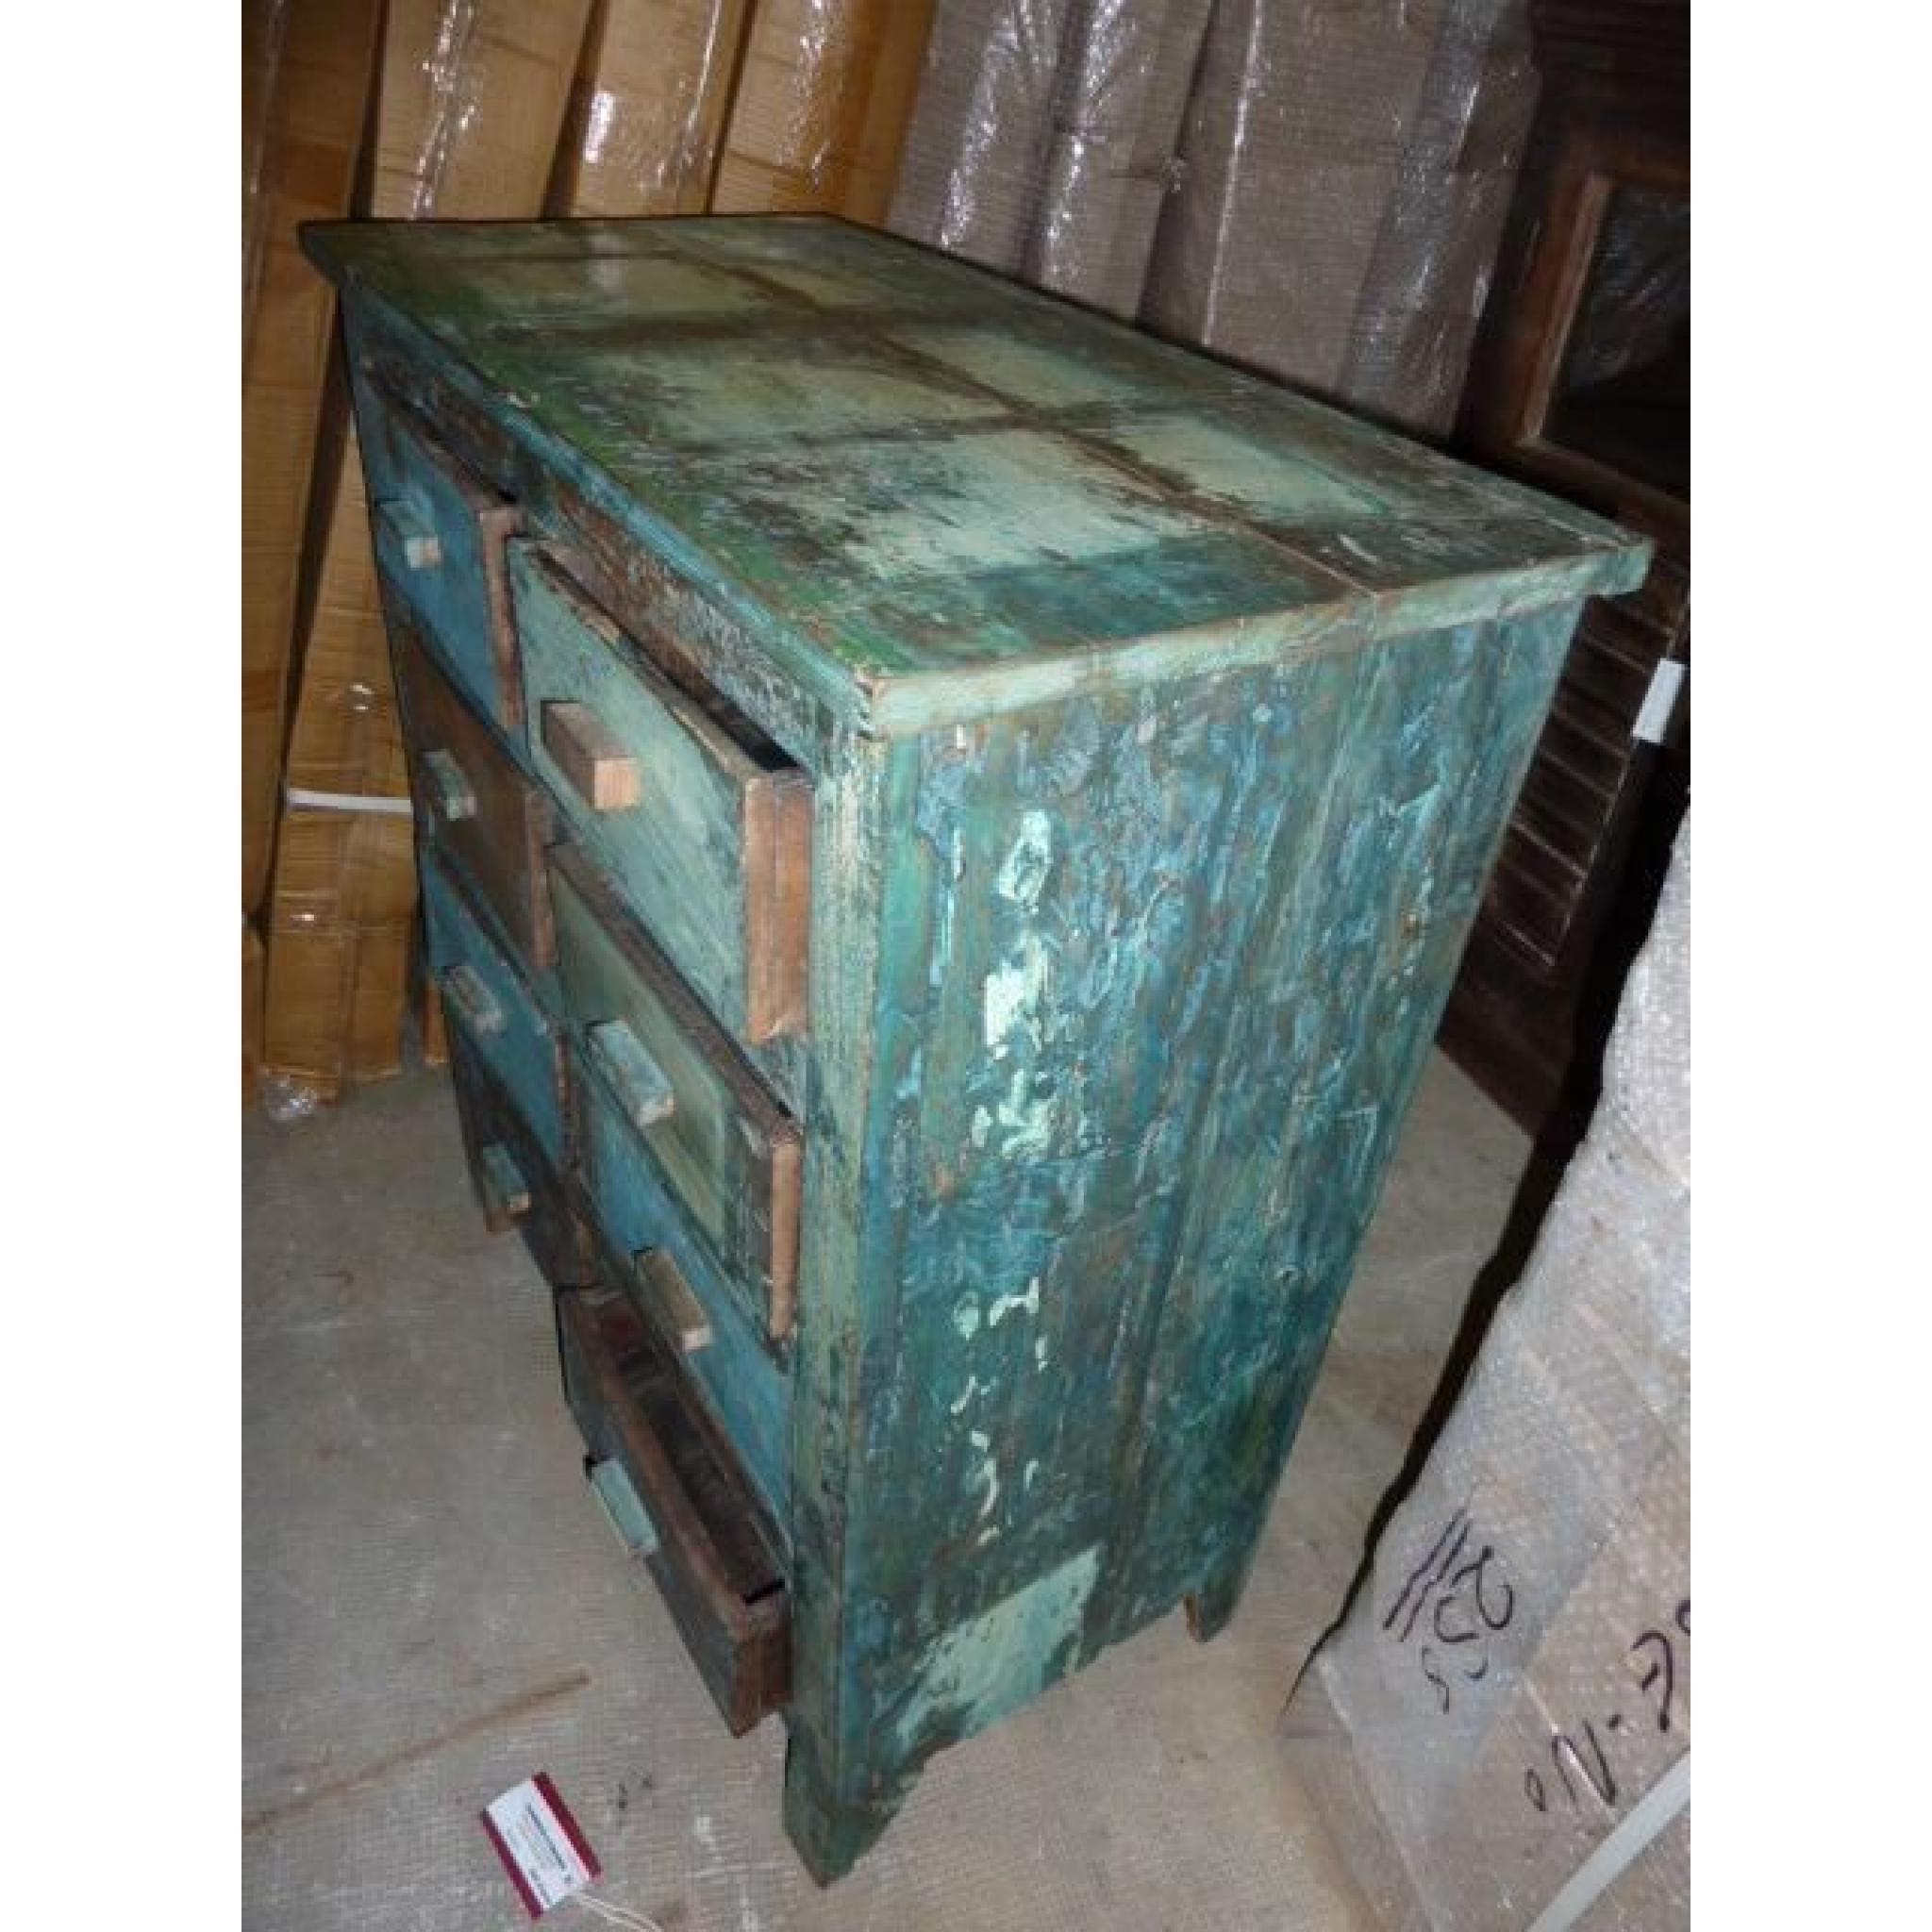 Vieille commode turquoise teck massif pas cher